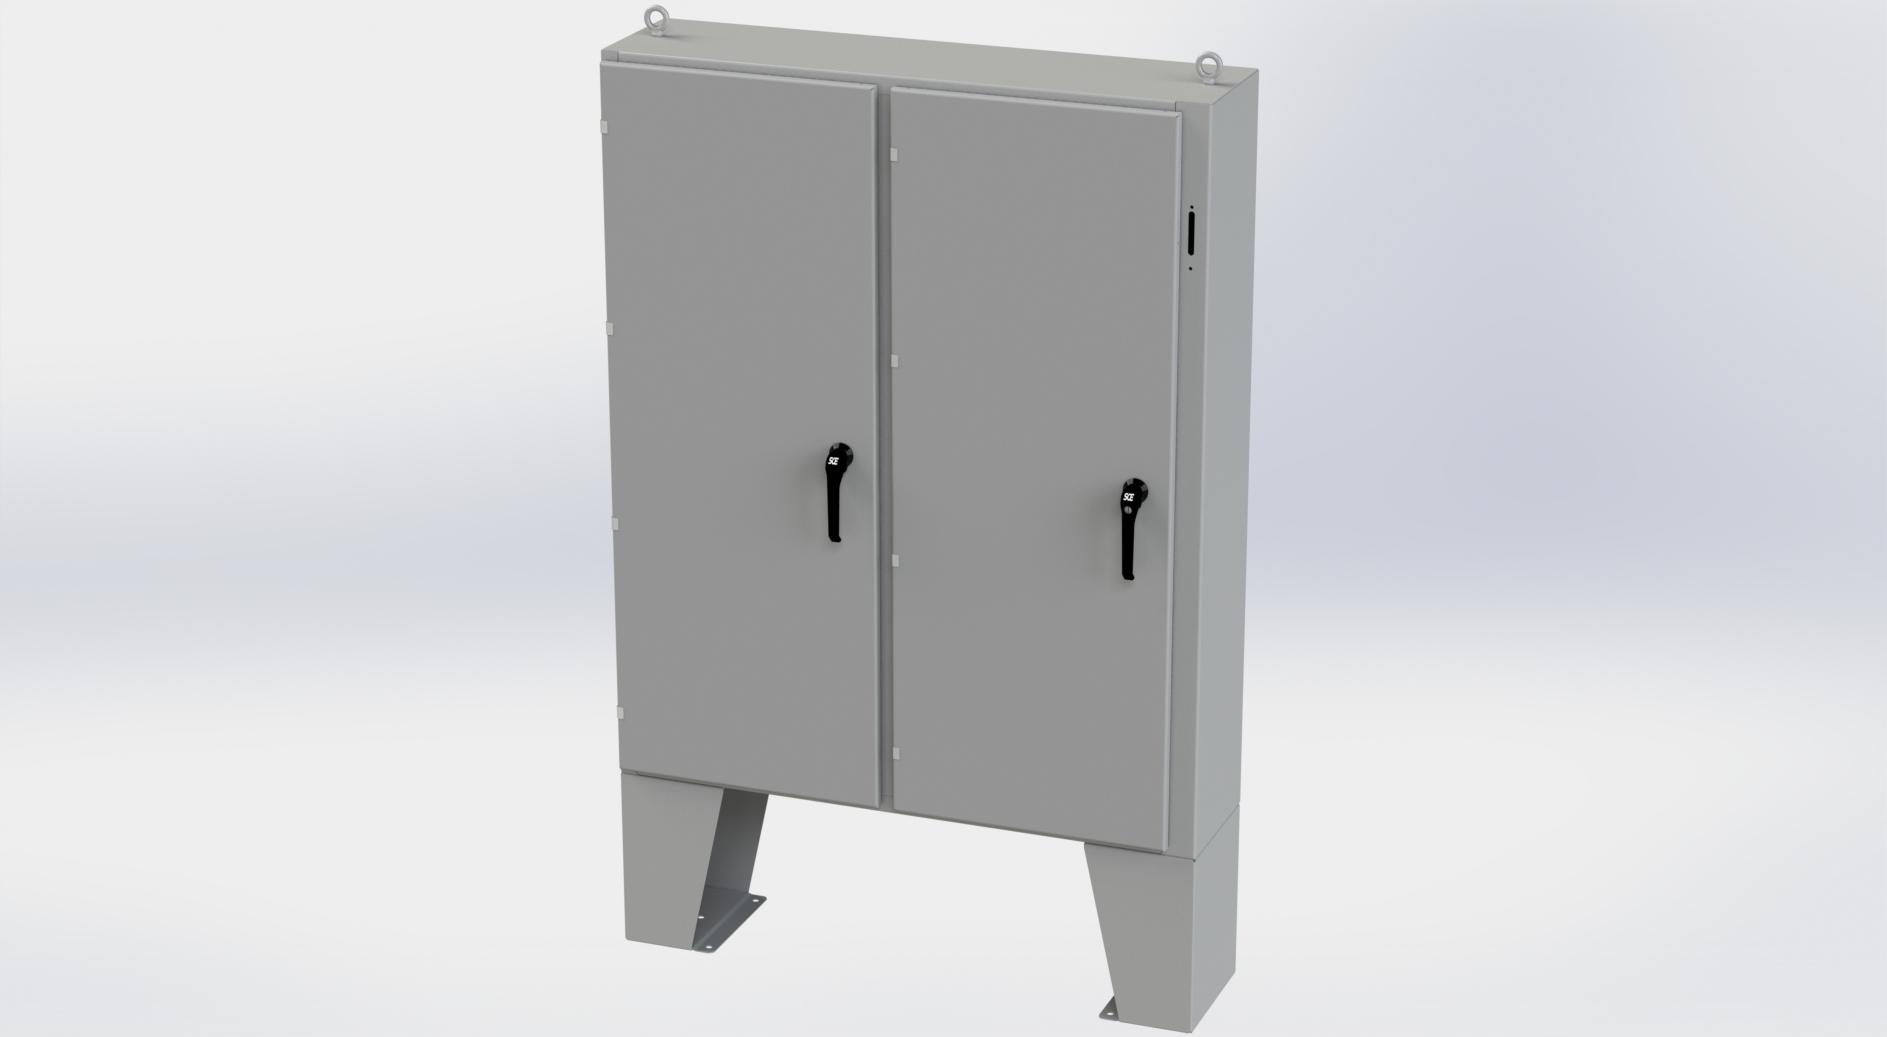 Saginaw Control SCE-60XEL4912LP 2DR XEL Enclosure, Height:60.00", Width:49.00", Depth:12.00", ANSI-61 gray powder coating inside and out. Optional sub-panels are powder coated white.